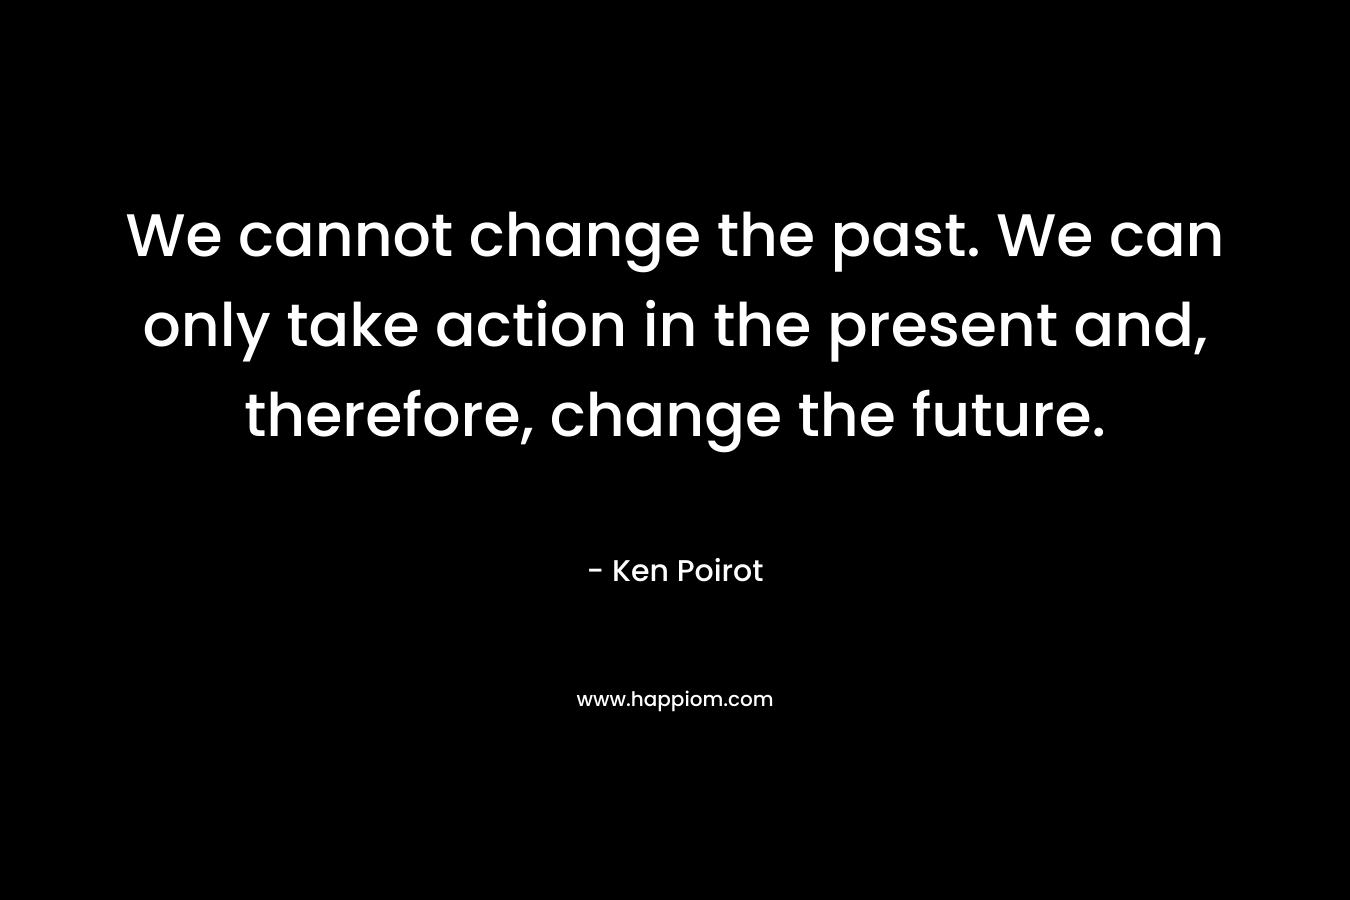 We cannot change the past. We can only take action in the present and, therefore, change the future.